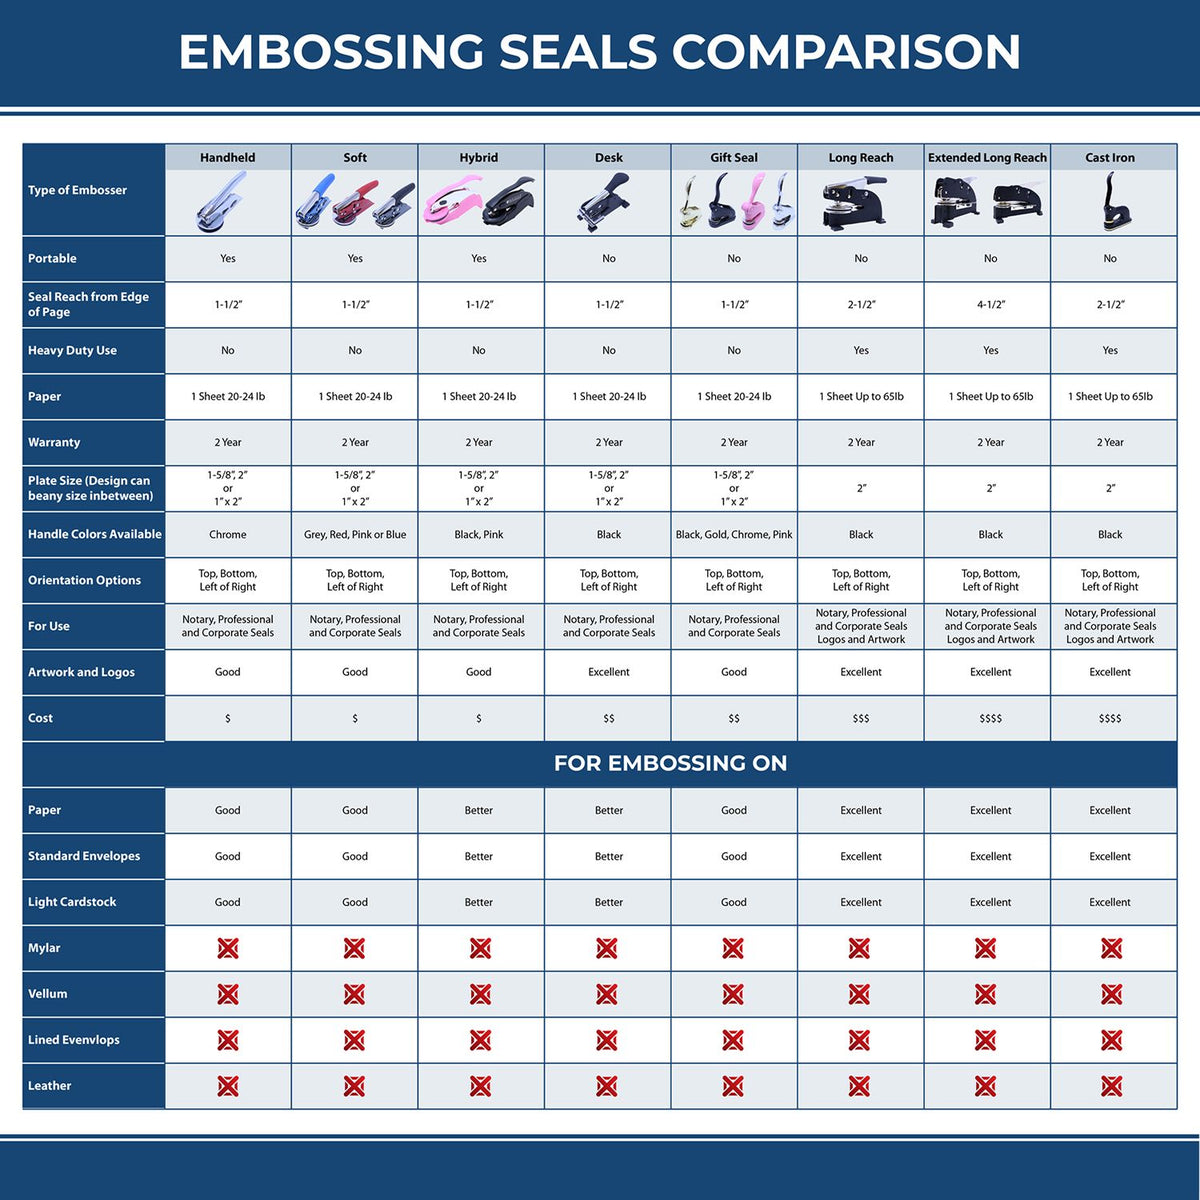 A comparison chart for the different types of mount models available for the Pennsylvania Engineer Desk Seal.